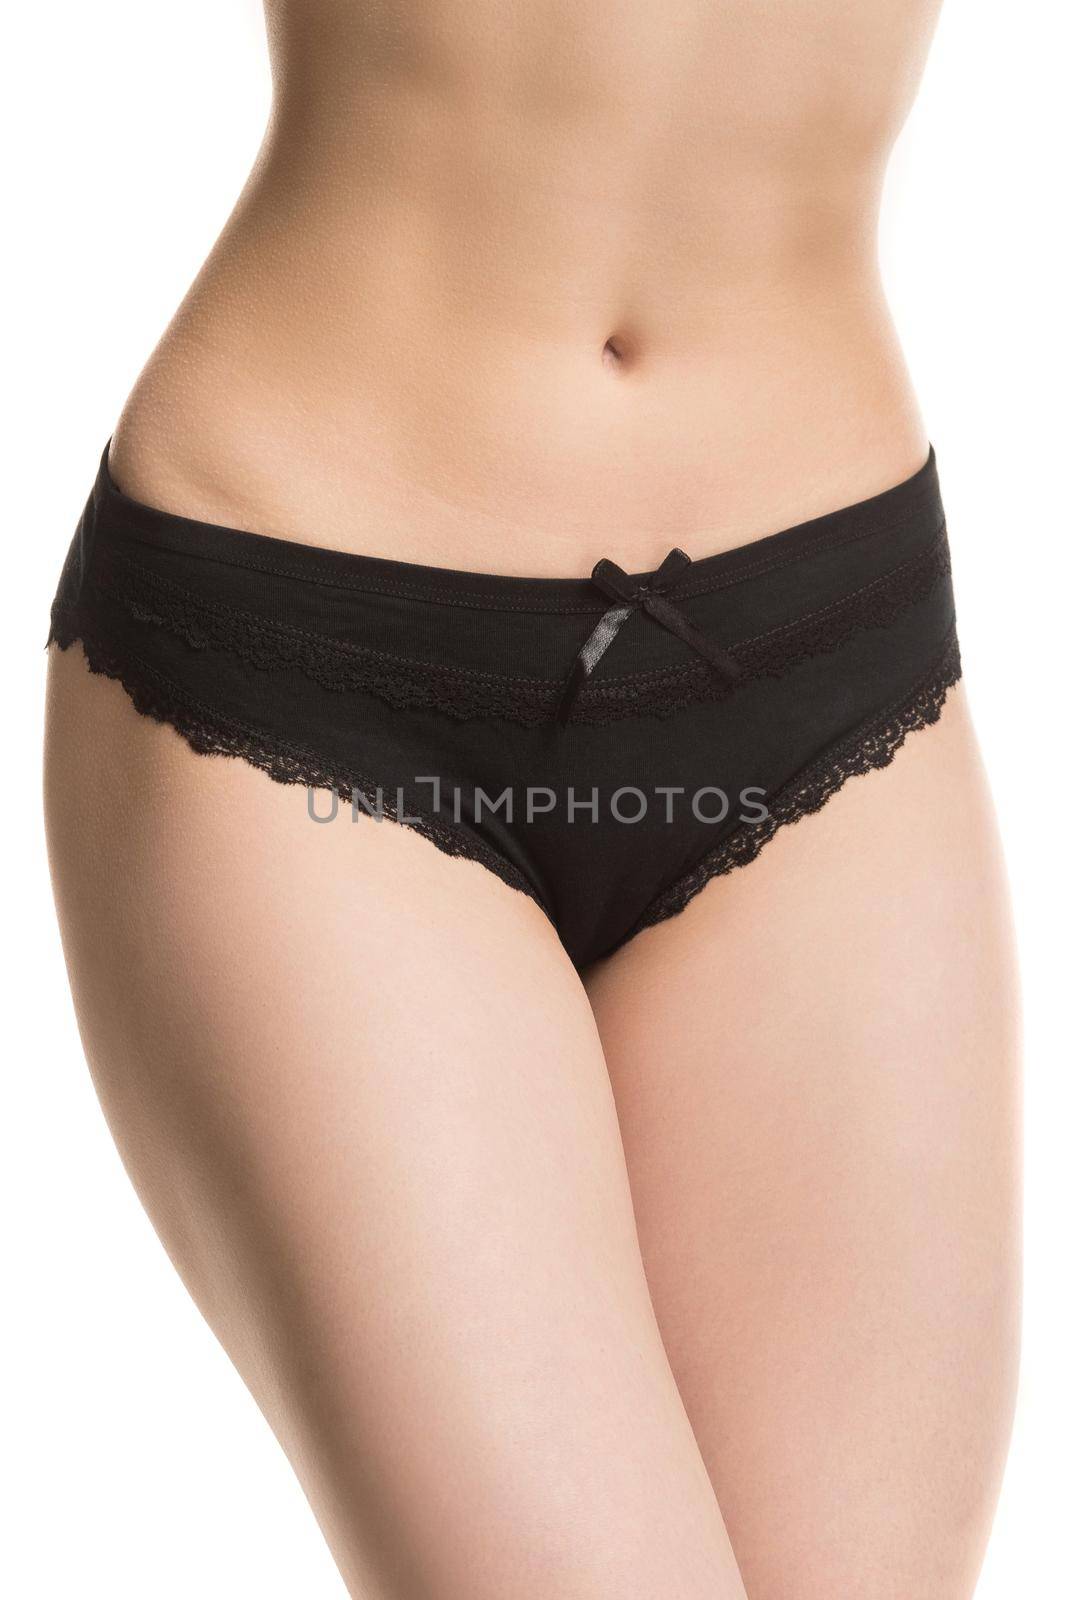 women's health concept, girl in panties on white background by TRMK